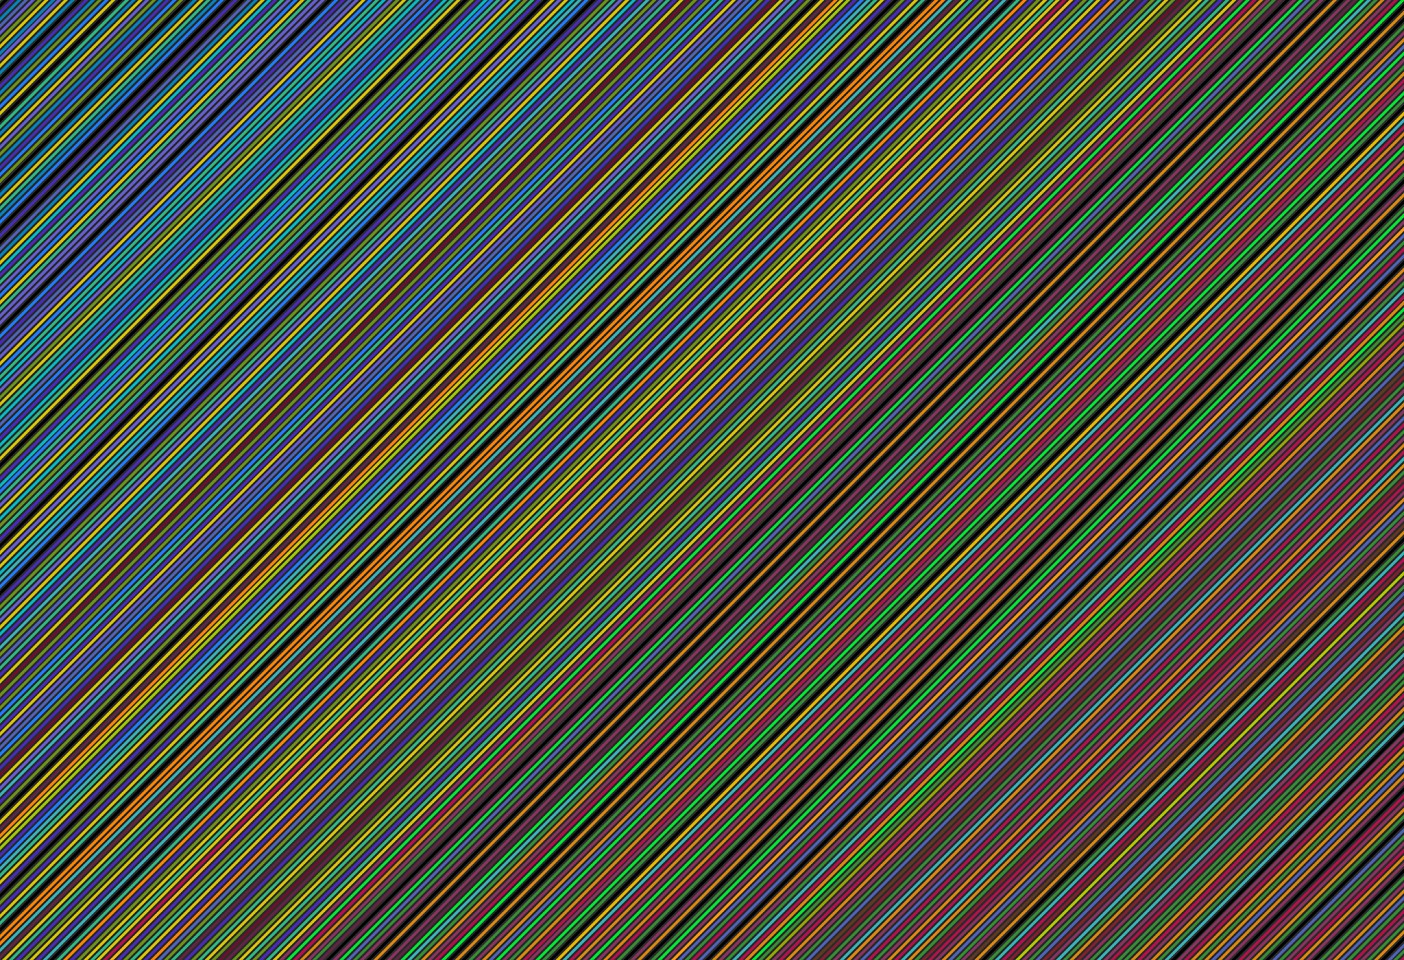 Dane Albert, Color Sticks #22 Night, 2023
Acrylic on canvas (Concept), 48 x 72 in. (121.9 x 182.9 cm)
Series of colored lines and shapes in multiple configurations
DA.2023.sticks-022-night